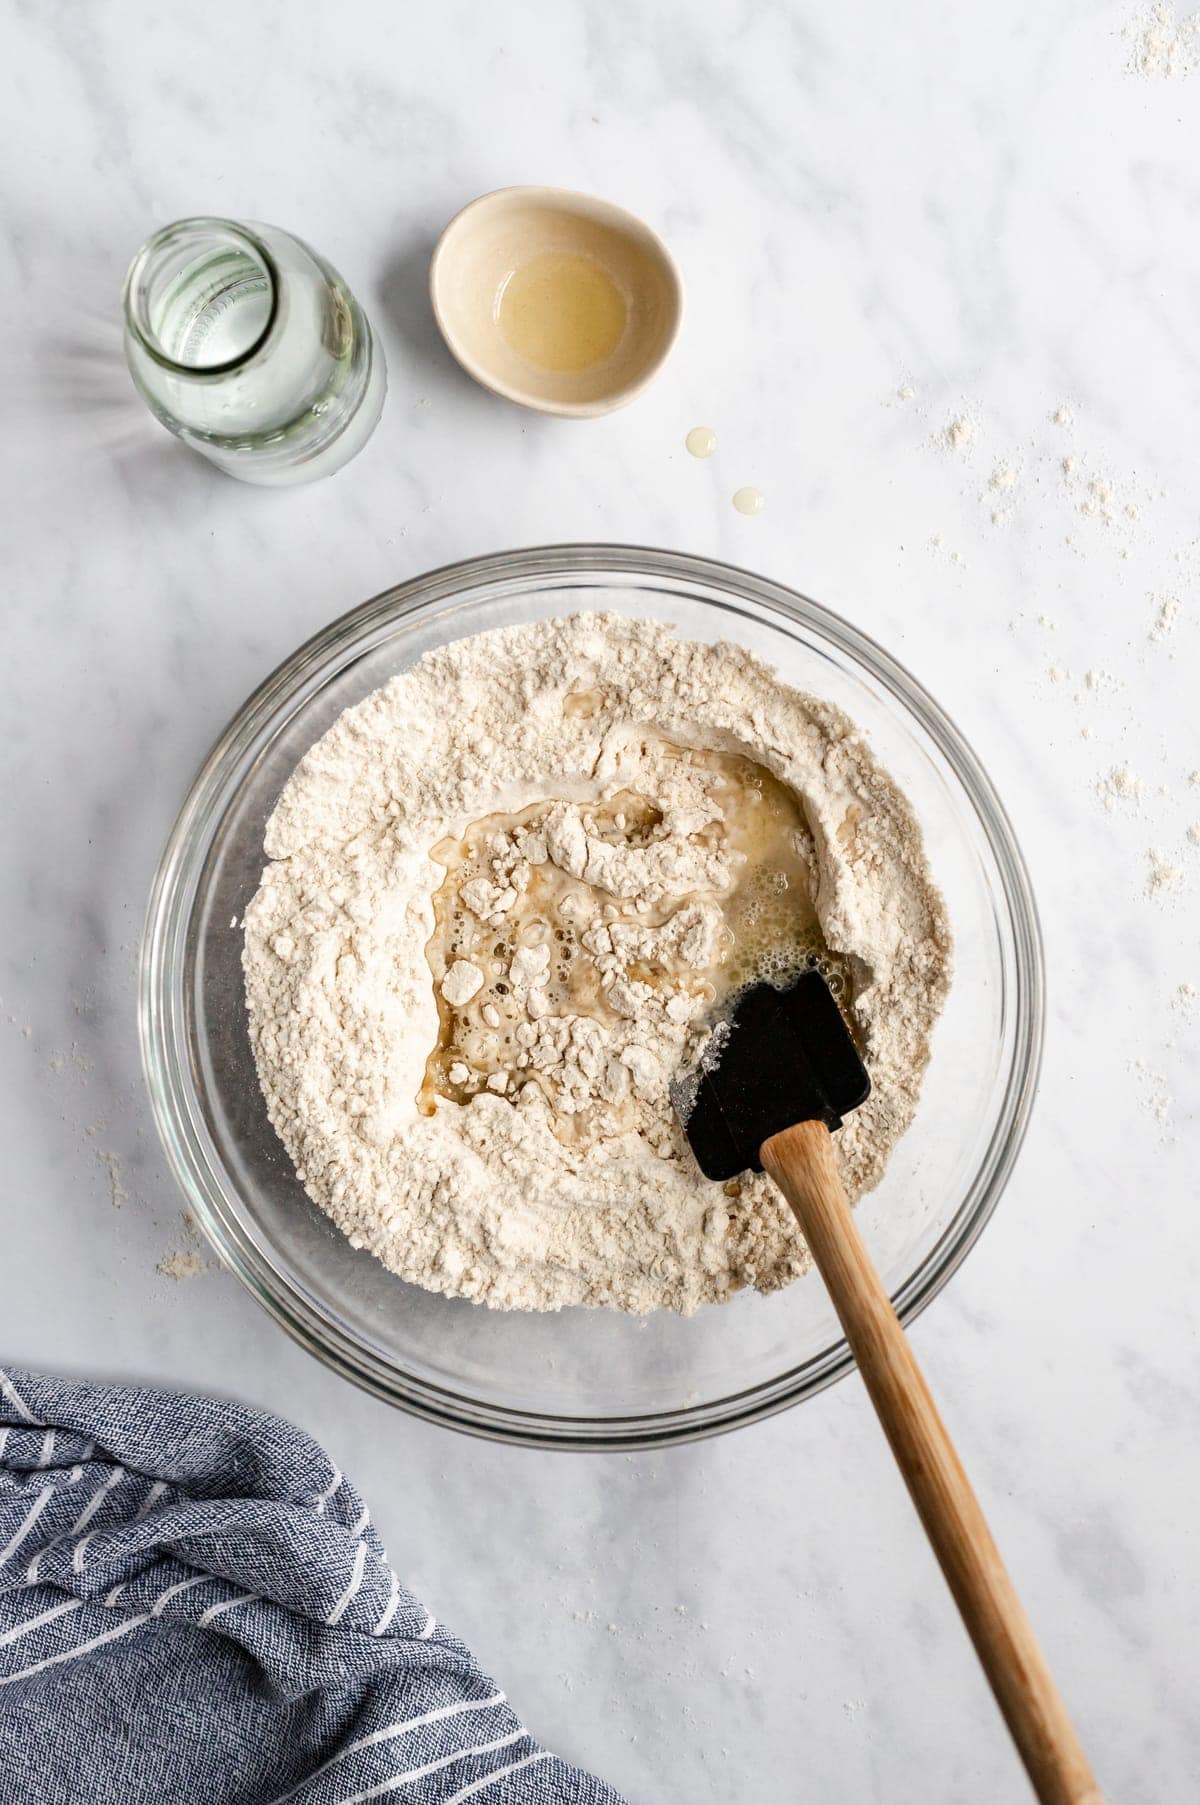 Flour, oil yeast and other pizza dough ingredients in a bowl with a spatula.